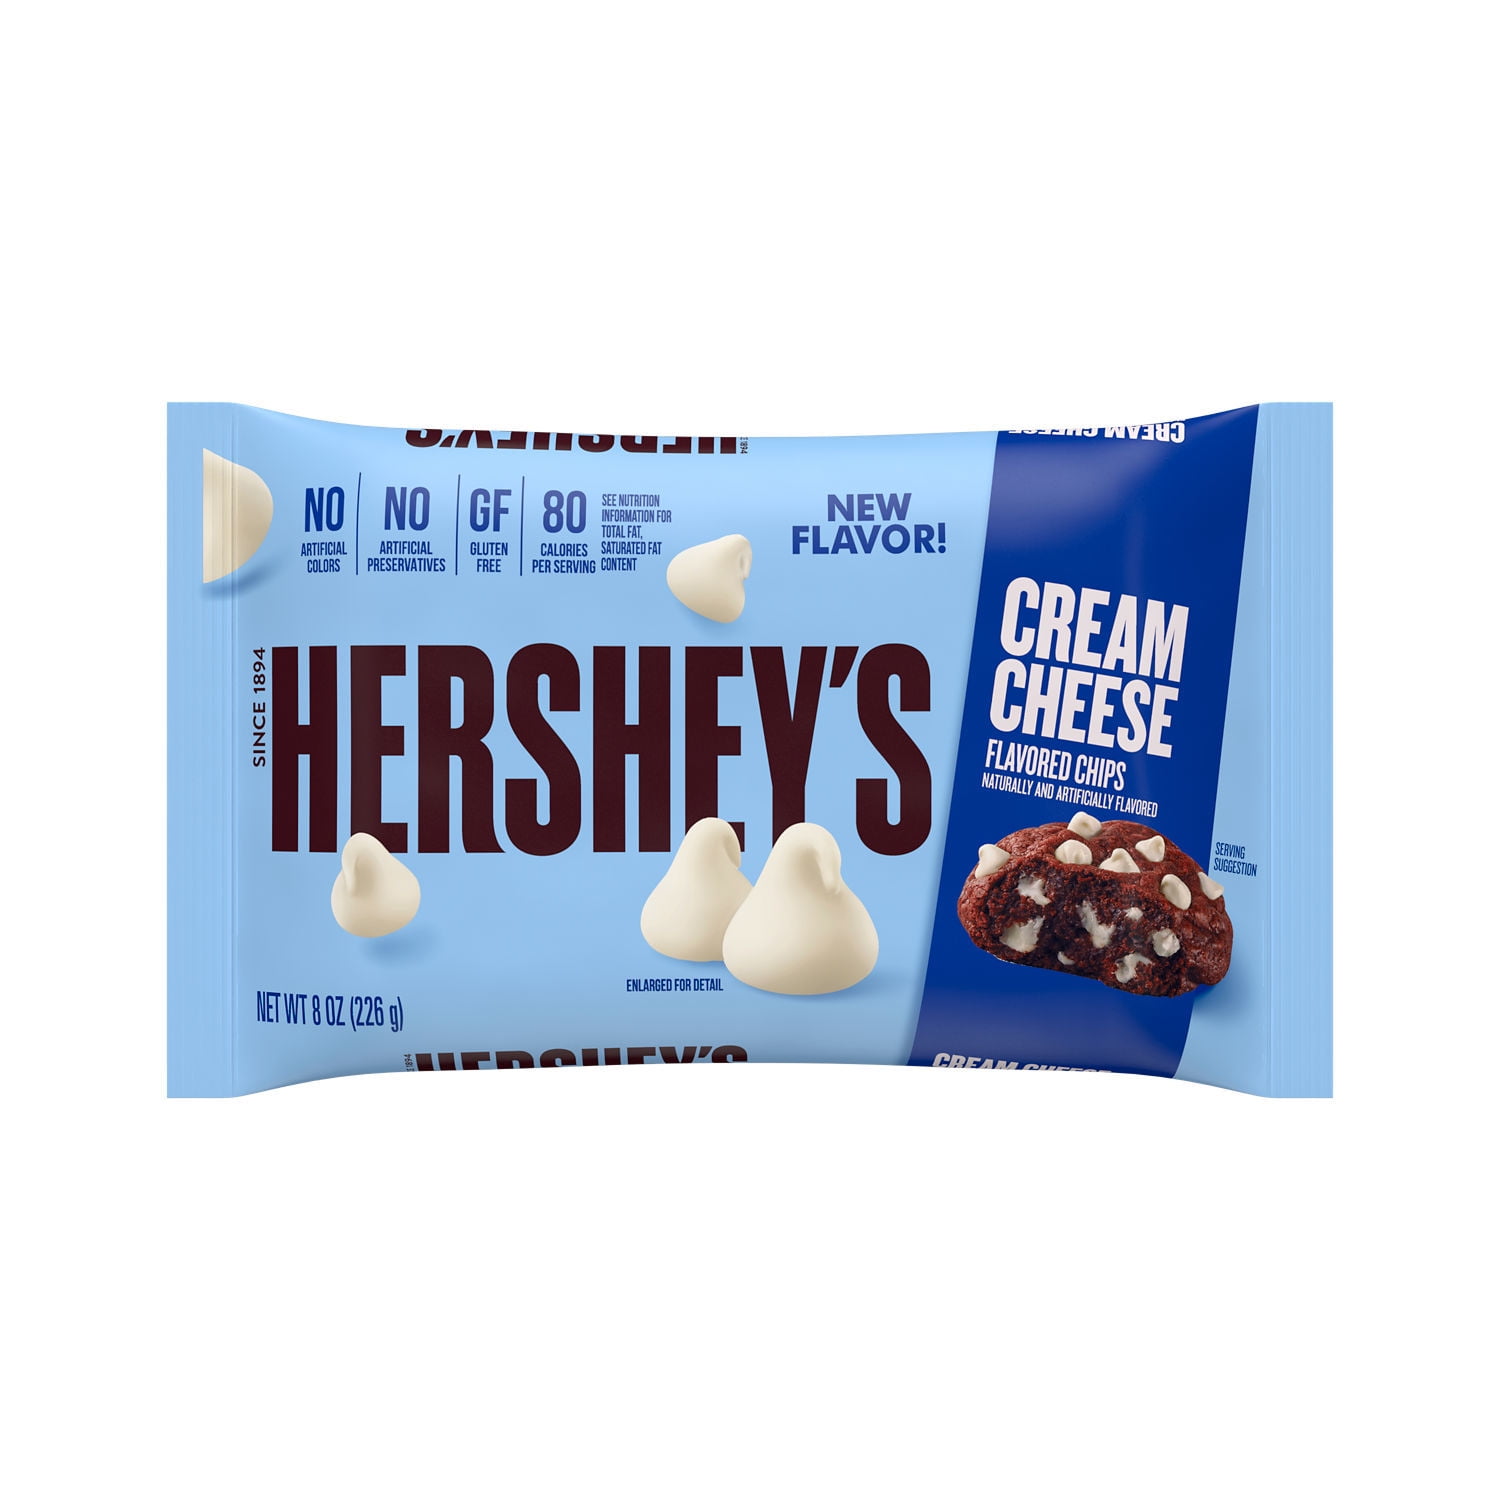 Hershey's LOT OF 5 Cream Cheese Baking Chips, LIMITED RUN GET 5 - 8 oz  Packages